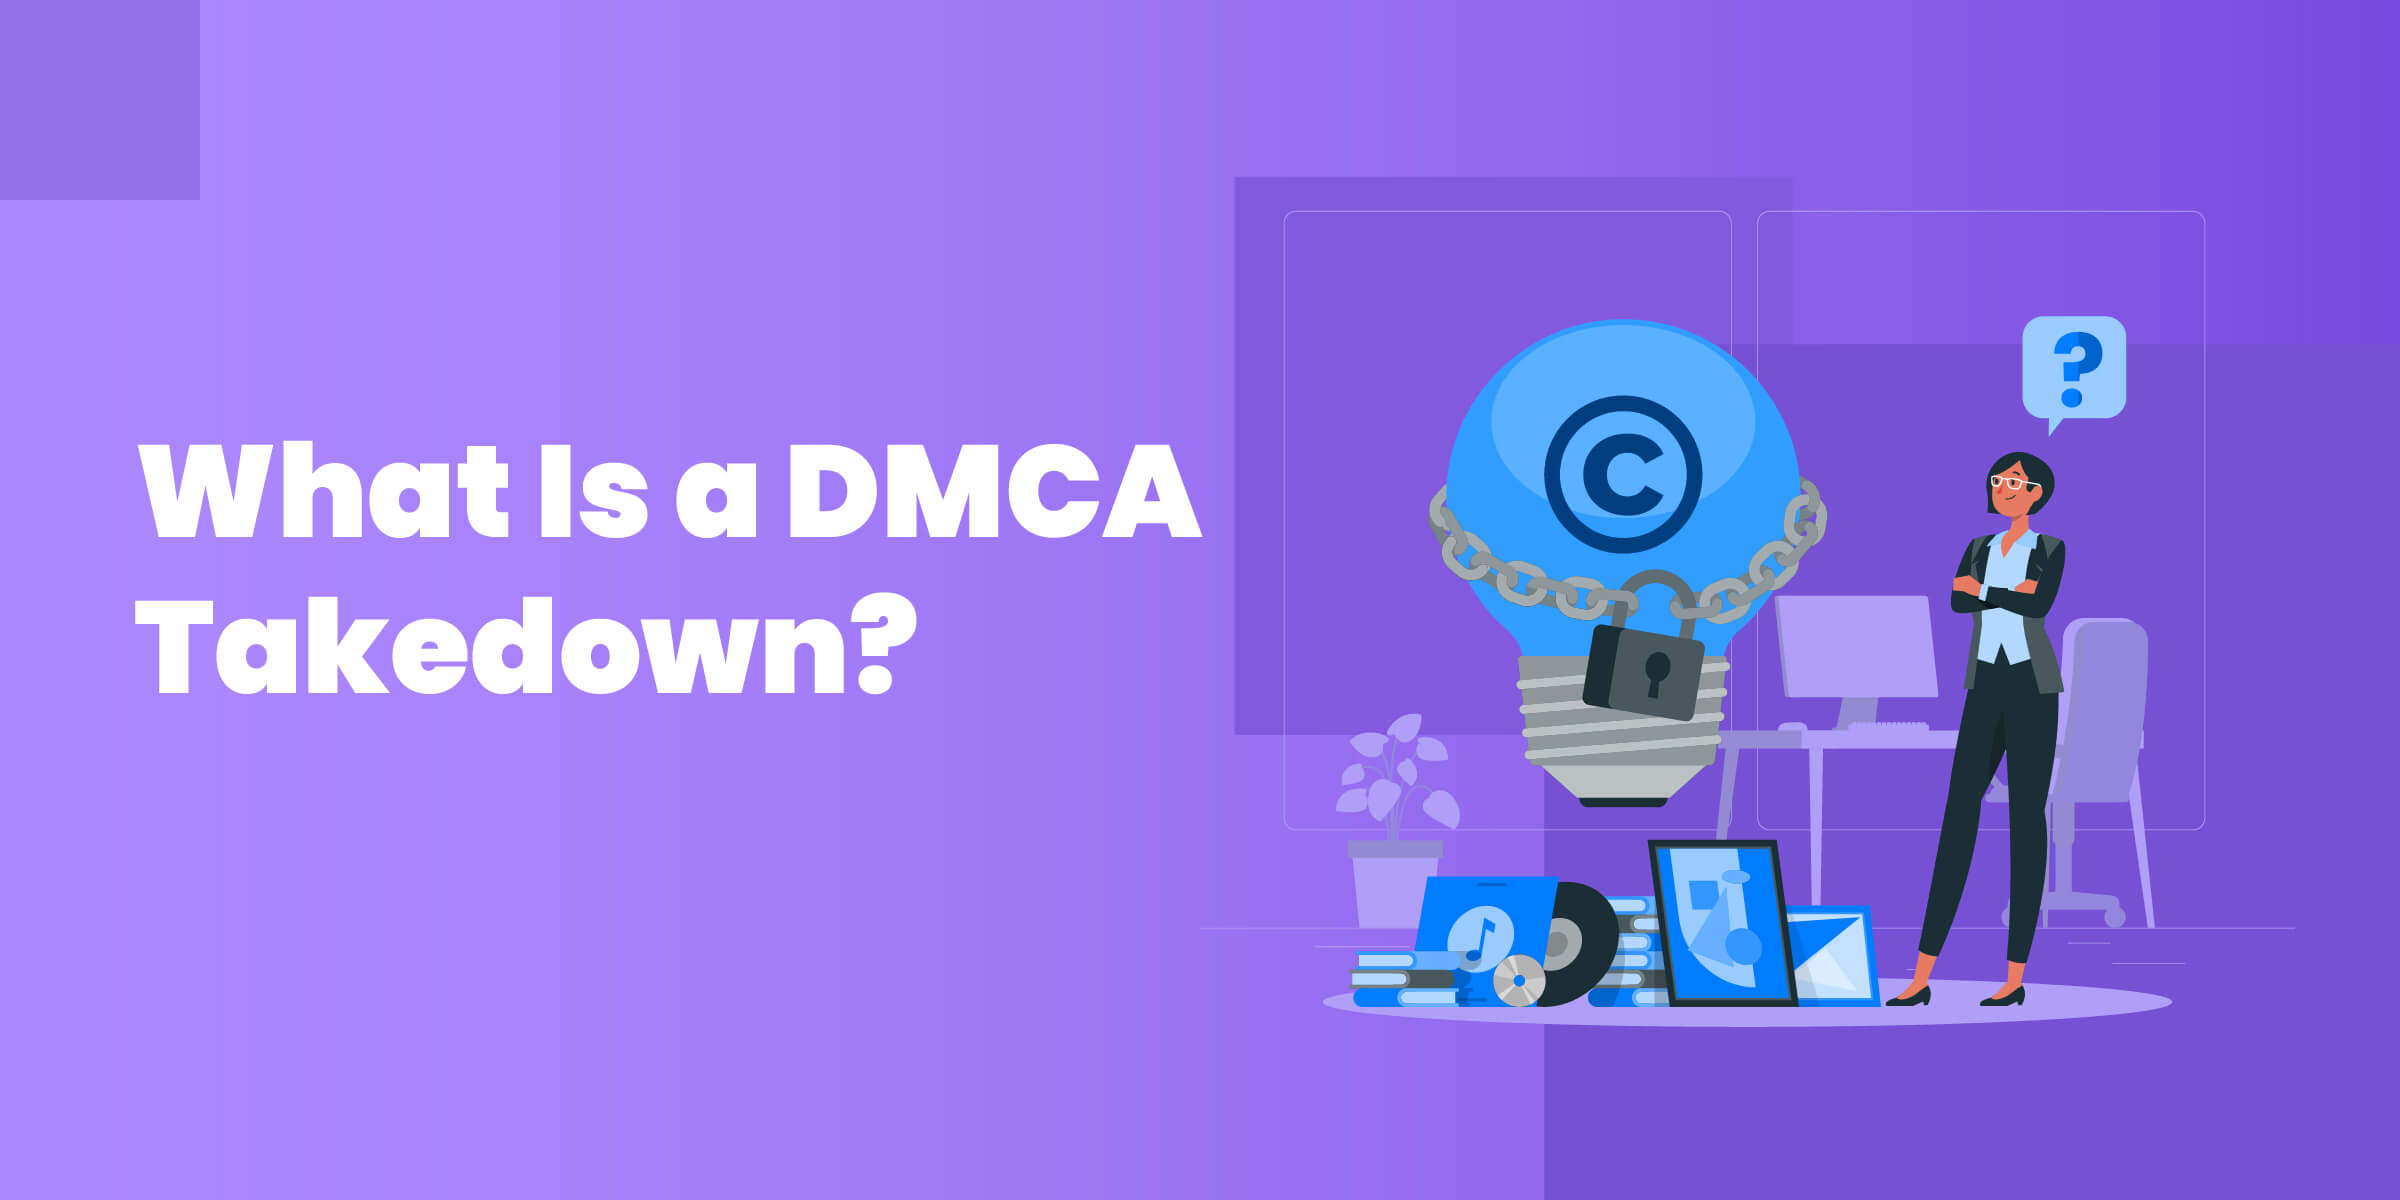 What Is a DMCA Takedown